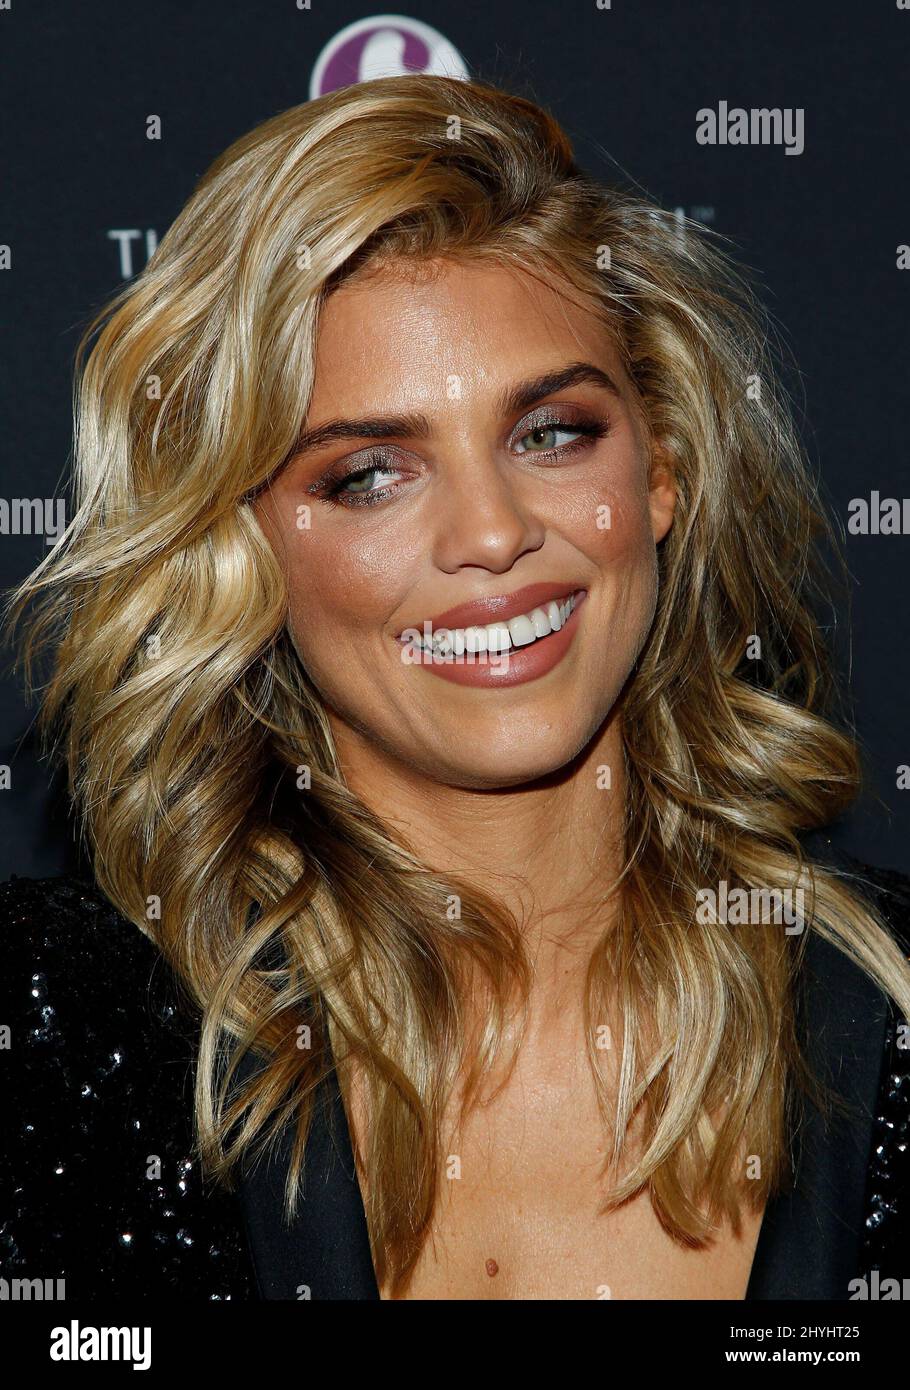 AnnaLynne McCord at BUSH Kick Off Grand Opening Weekend at The Barbershop Cuts & Cocktails in The Cosmopolitan on March 15, 2019 in Las Vegas, NV. Stock Photo